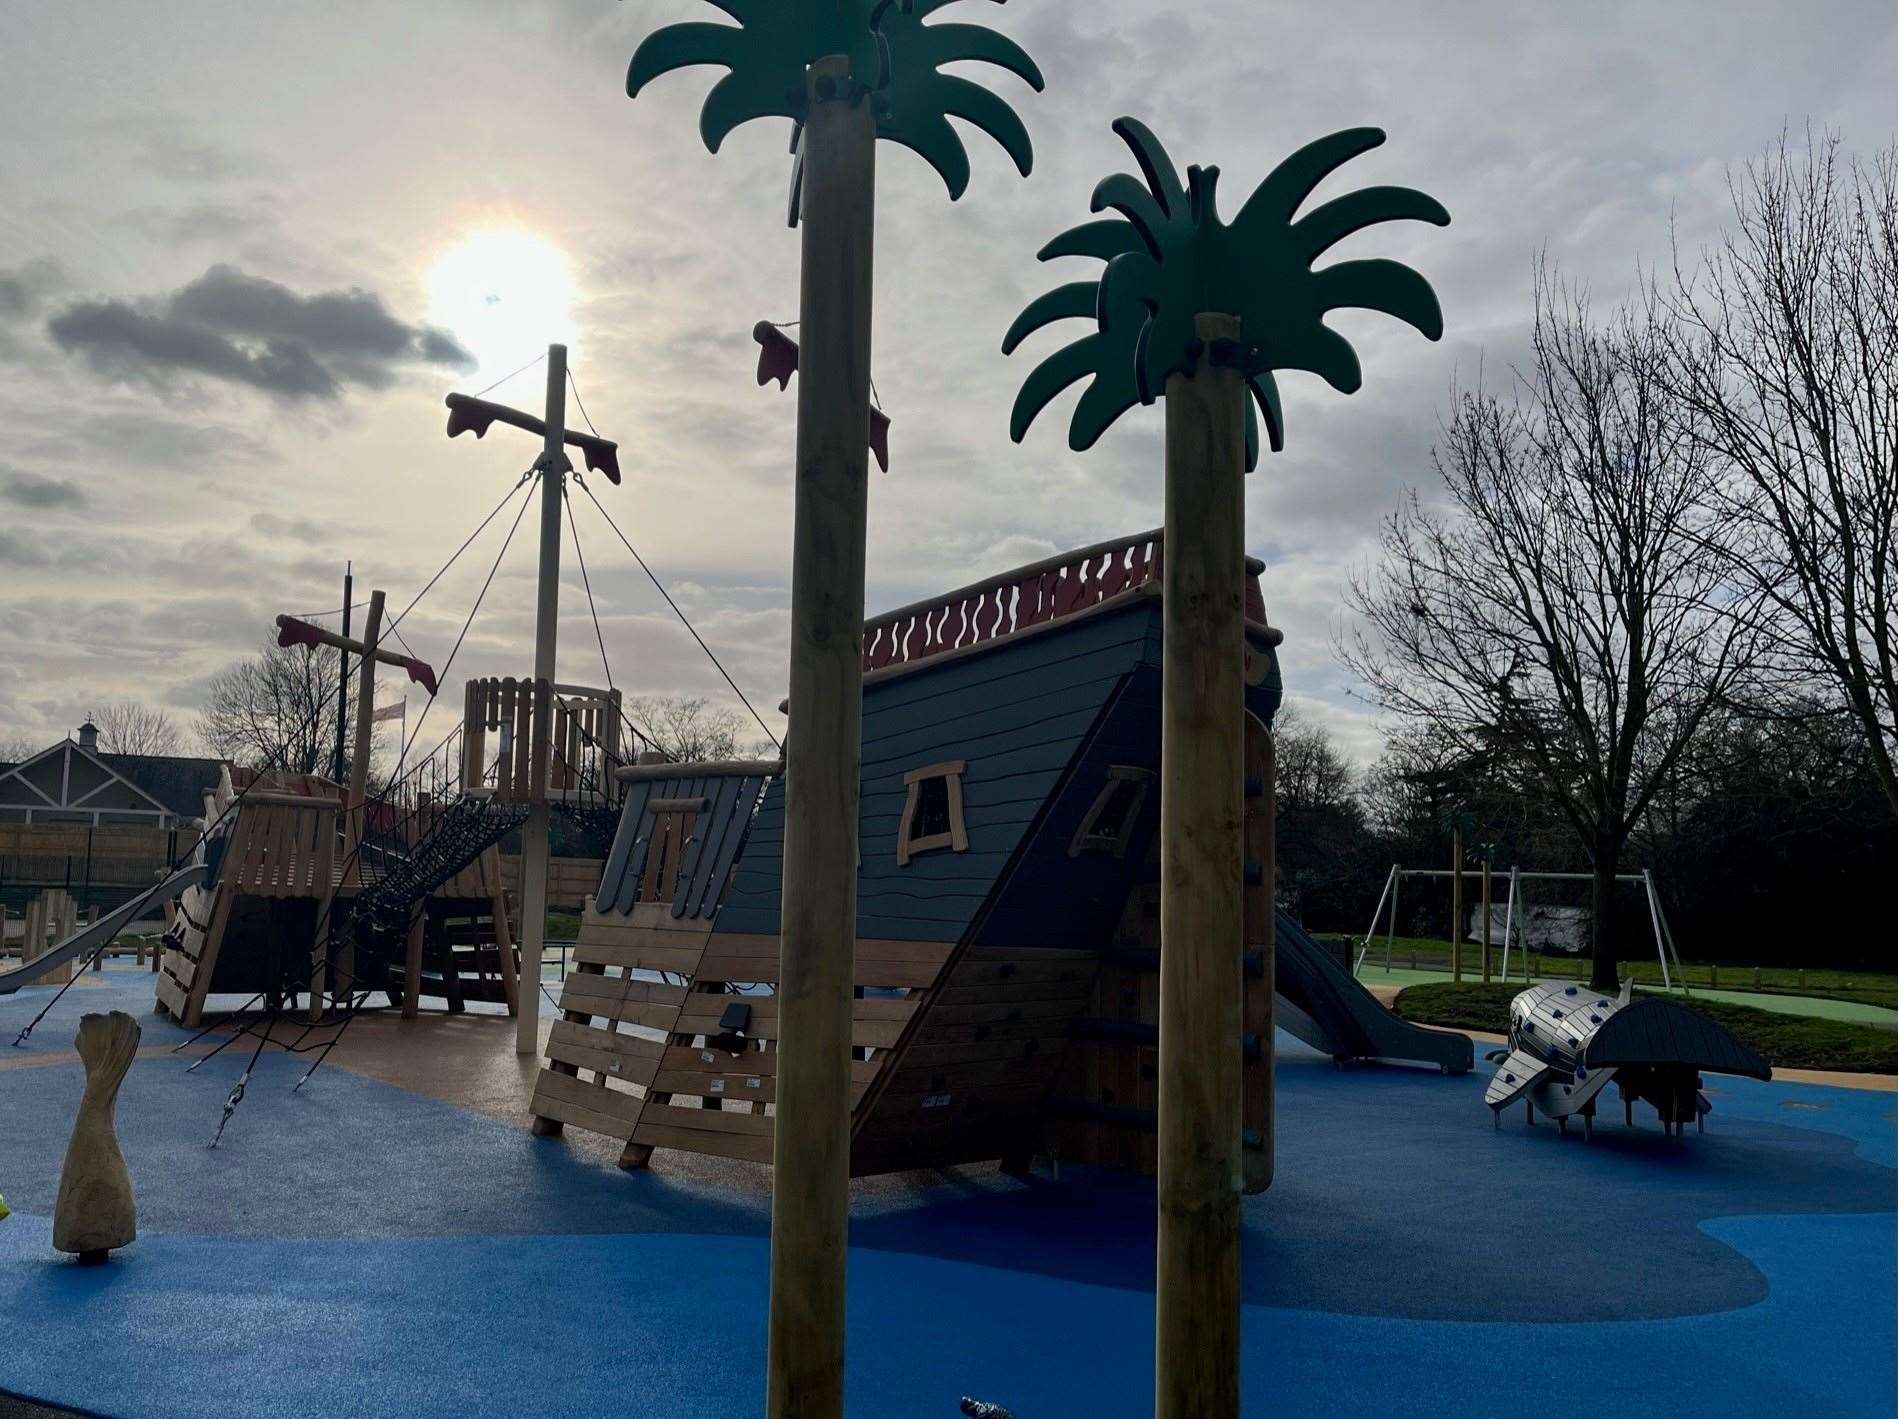 The galleon play equipment at Buccaneer Bay, in Central Park, Dartford